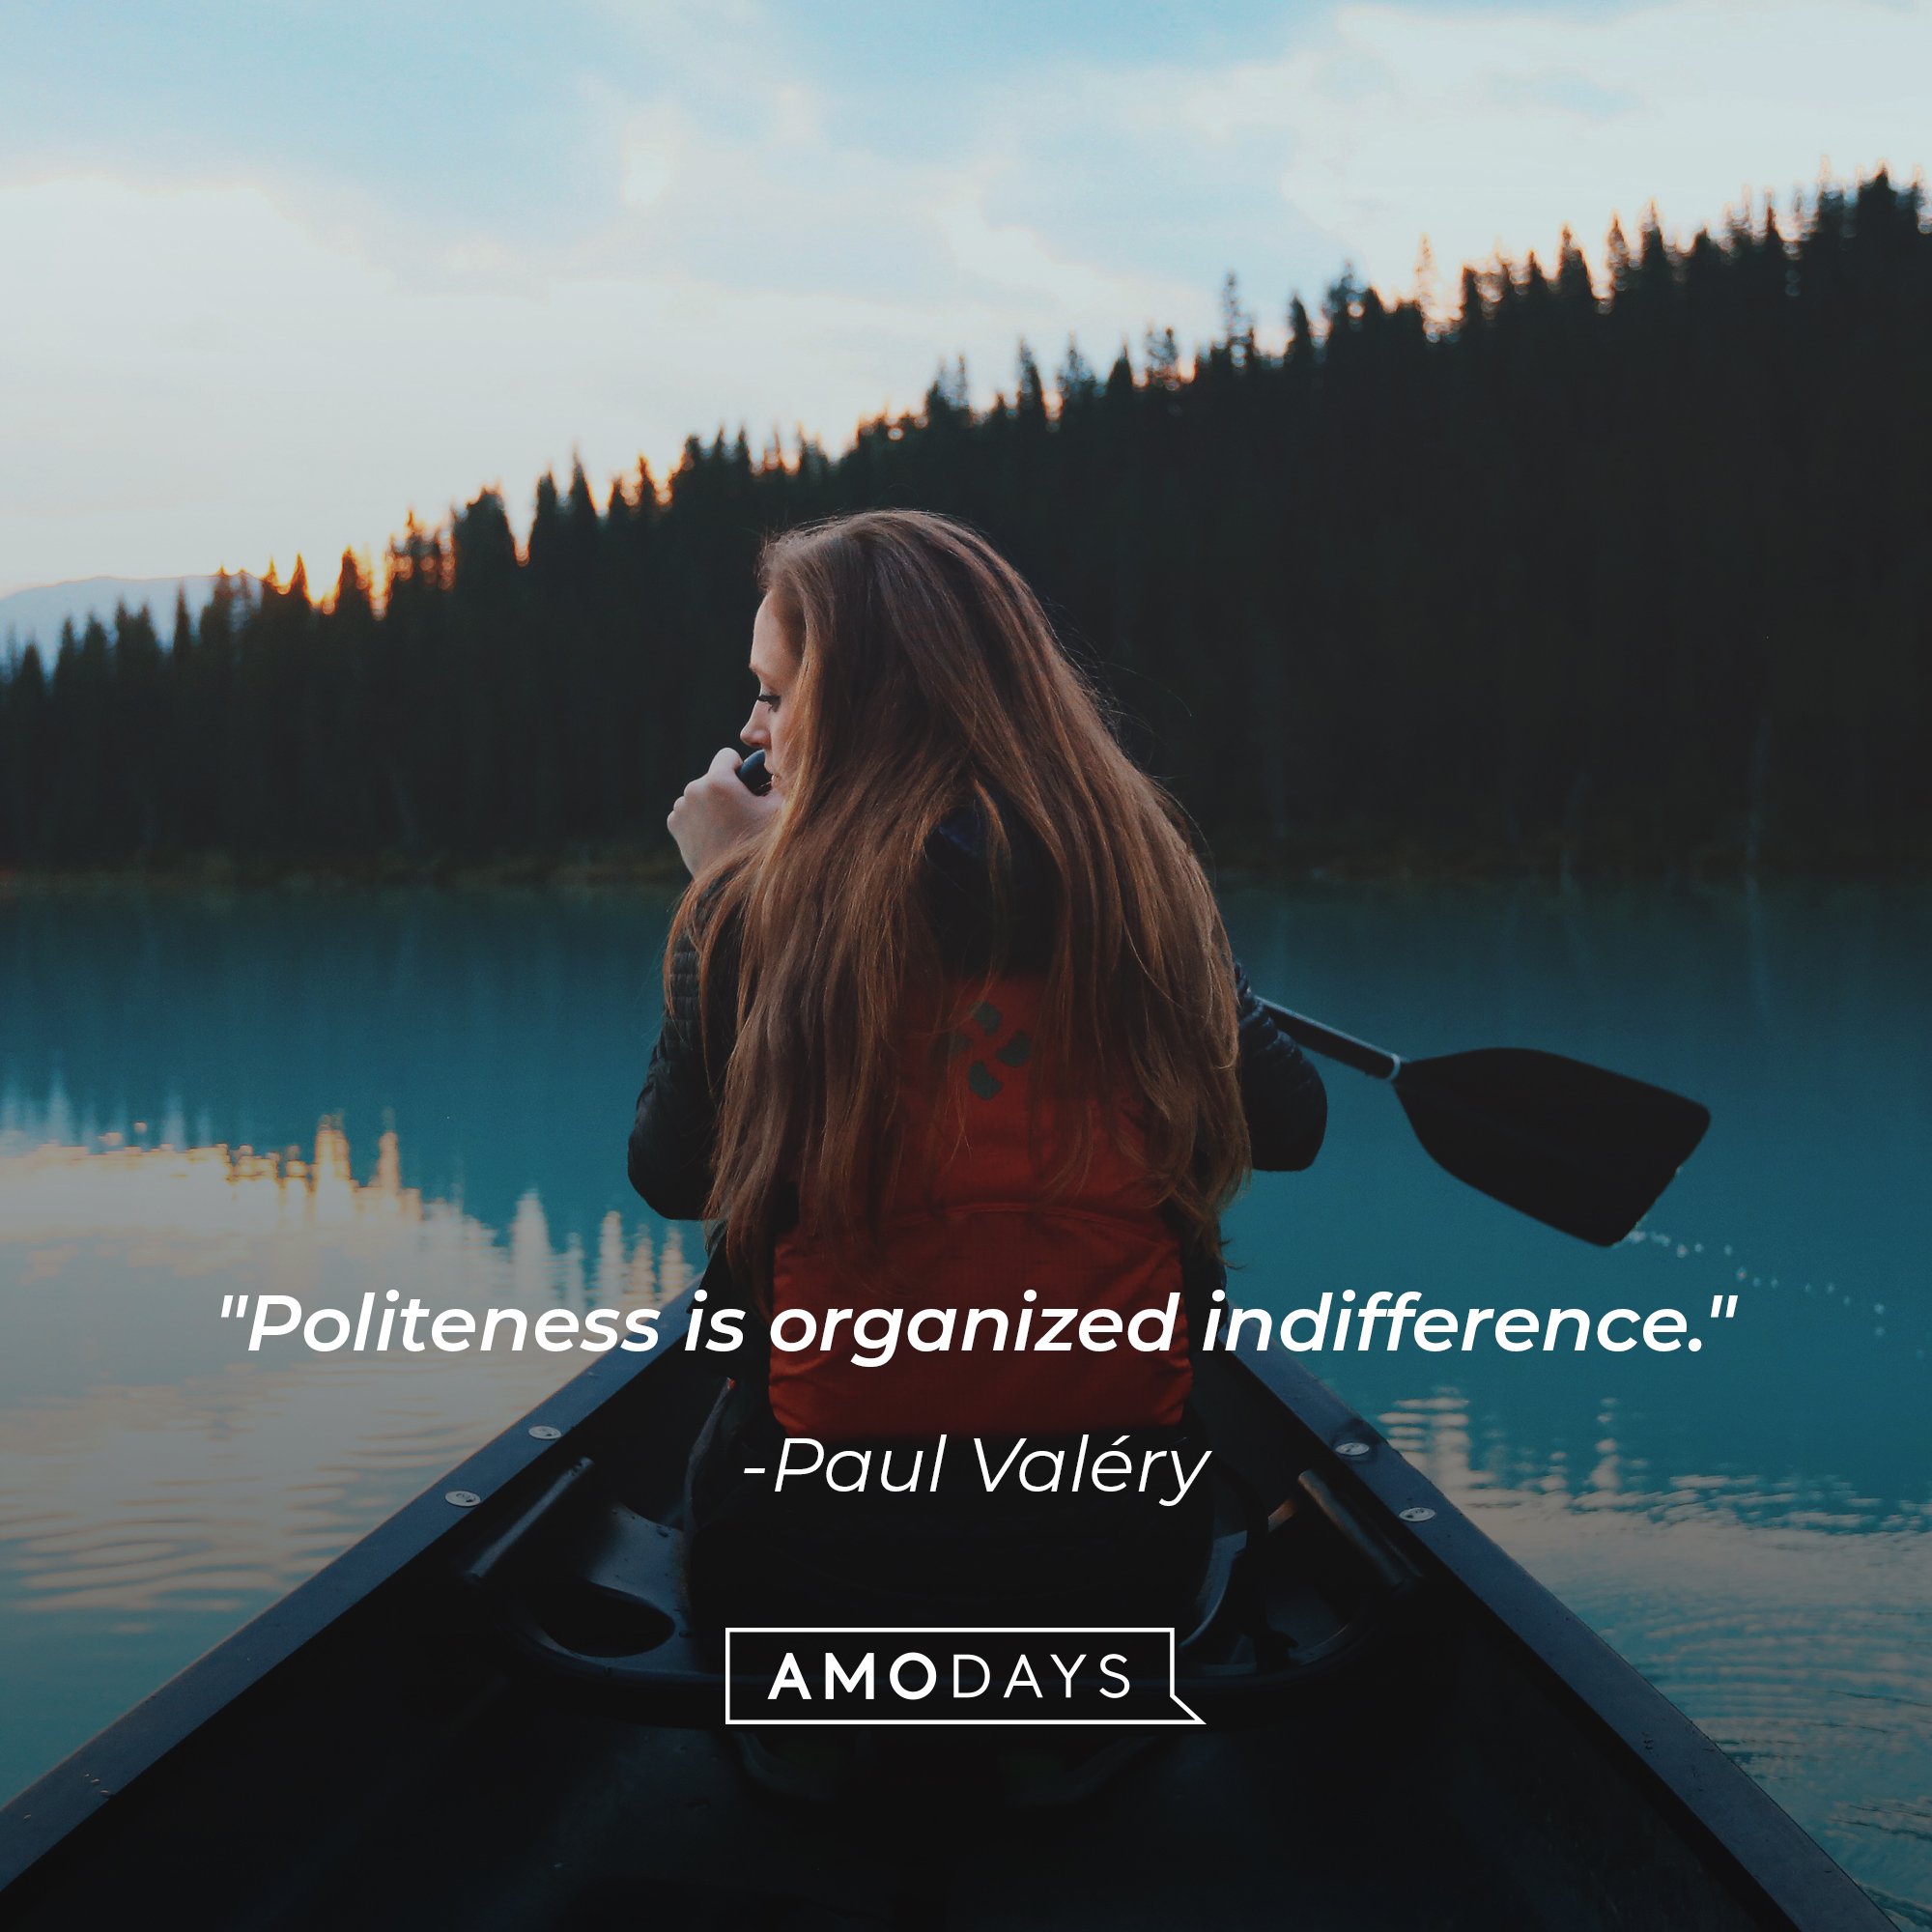 Paul Valéry's quote: "Politeness is organized indifference." | Image: AmoDays